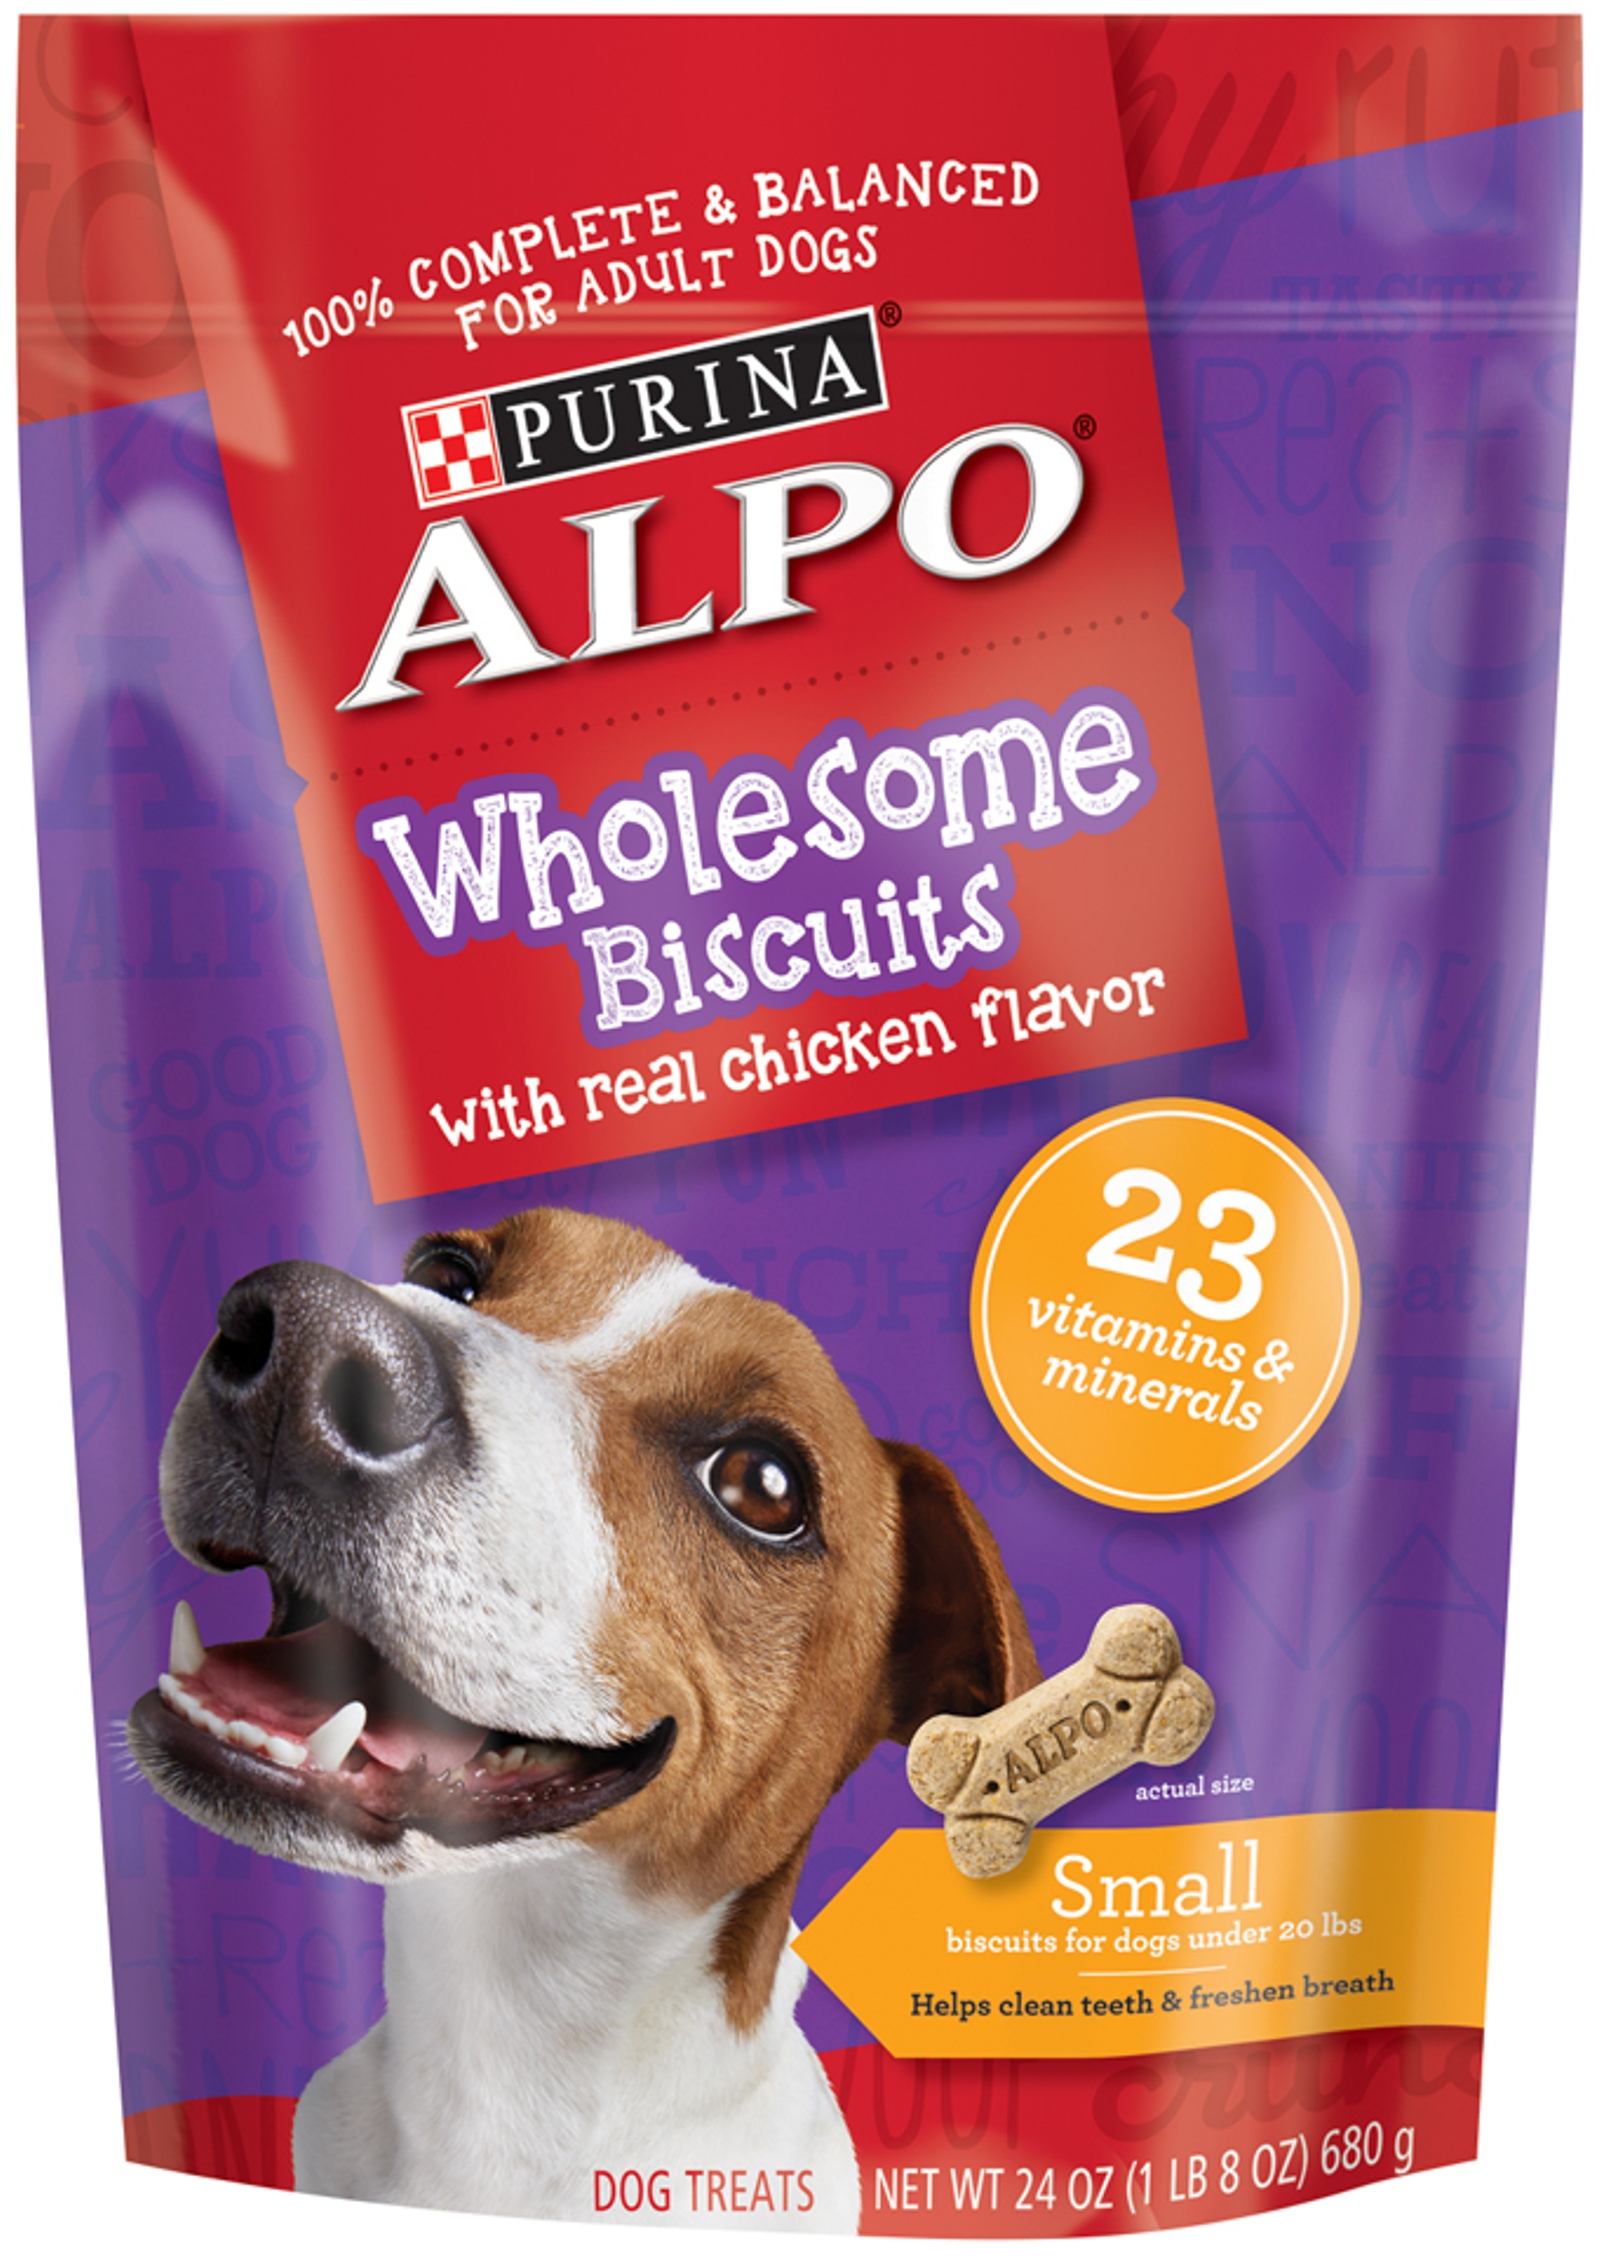 Alpo Wholesome Biscuits Small with Real Chicken Flavor Dog Treats, 24 Oz.